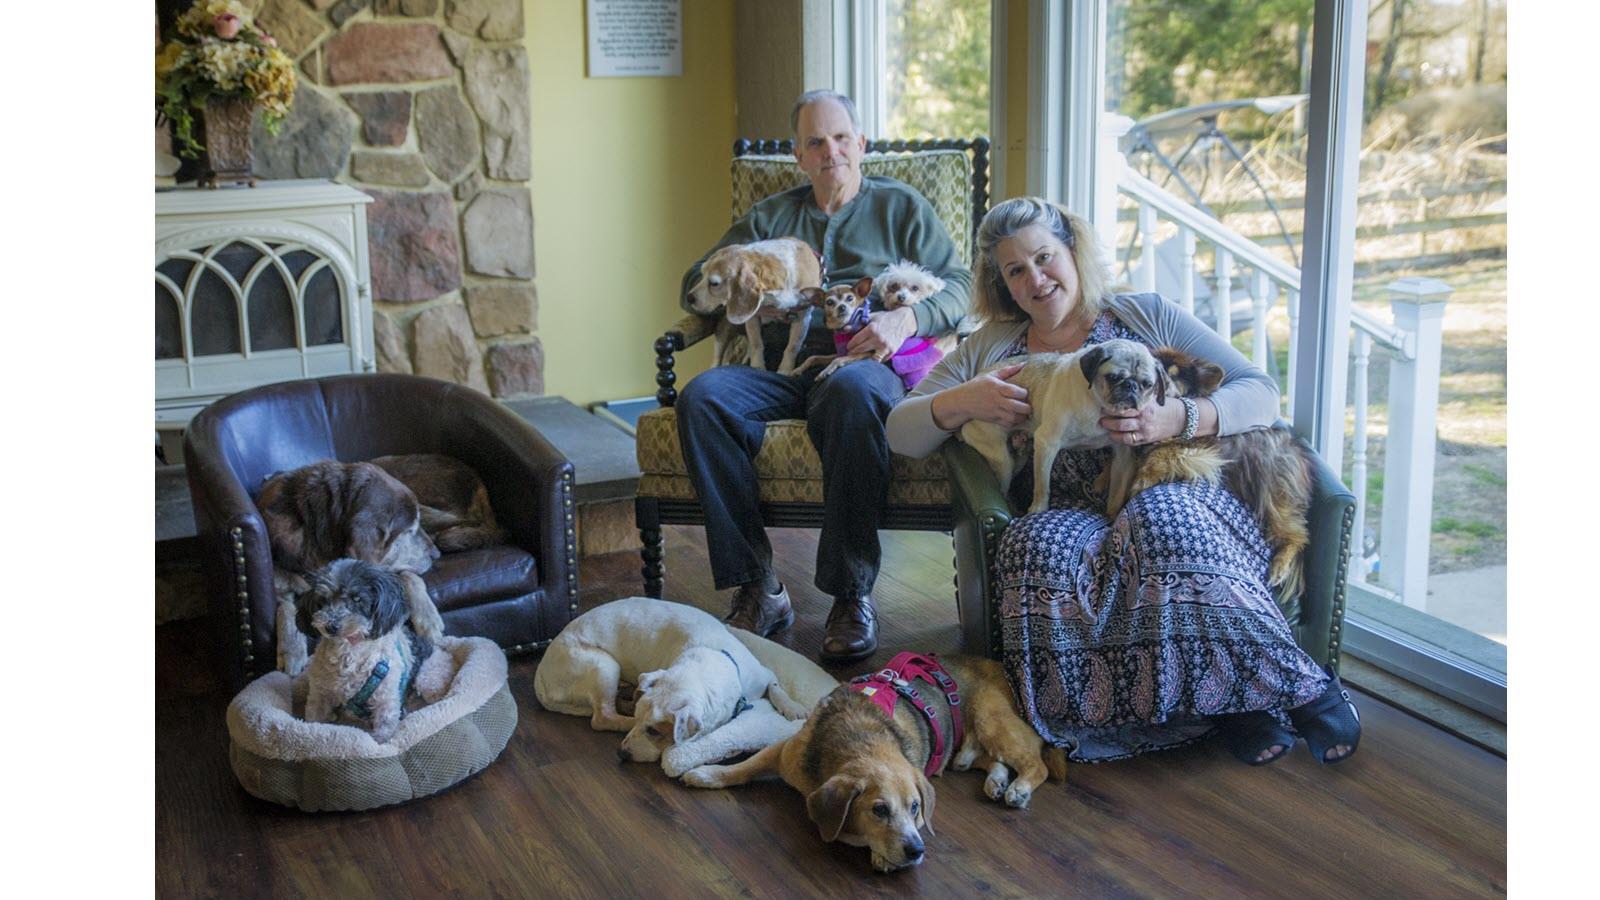 Jeff Allen and wife Michele surrounded by dogs they care for